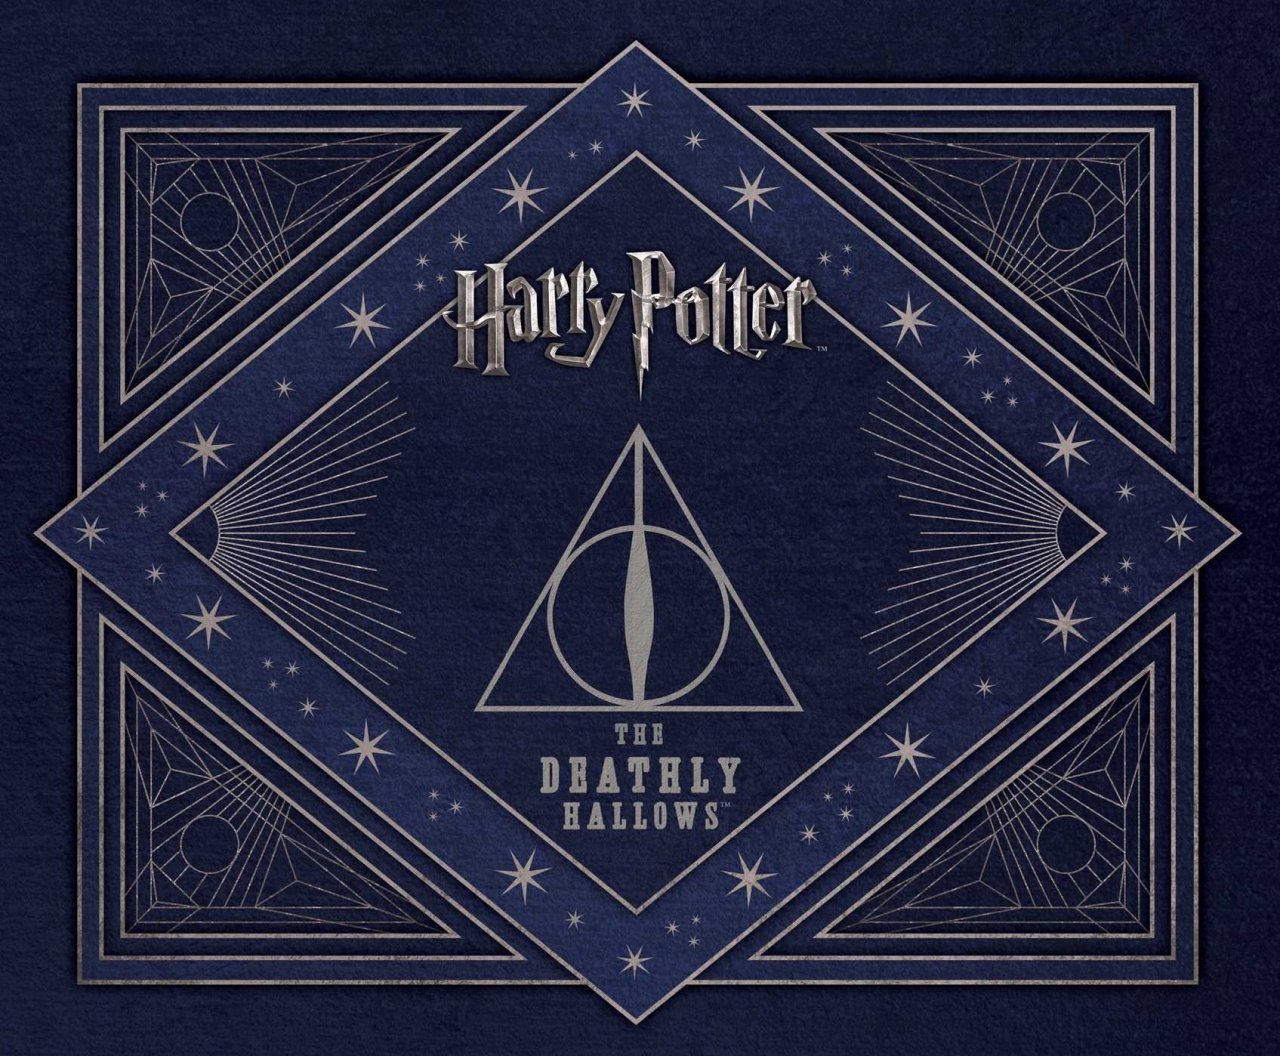 Harry Potter: The Deathly Hallows Deluxe Stationery Set HC